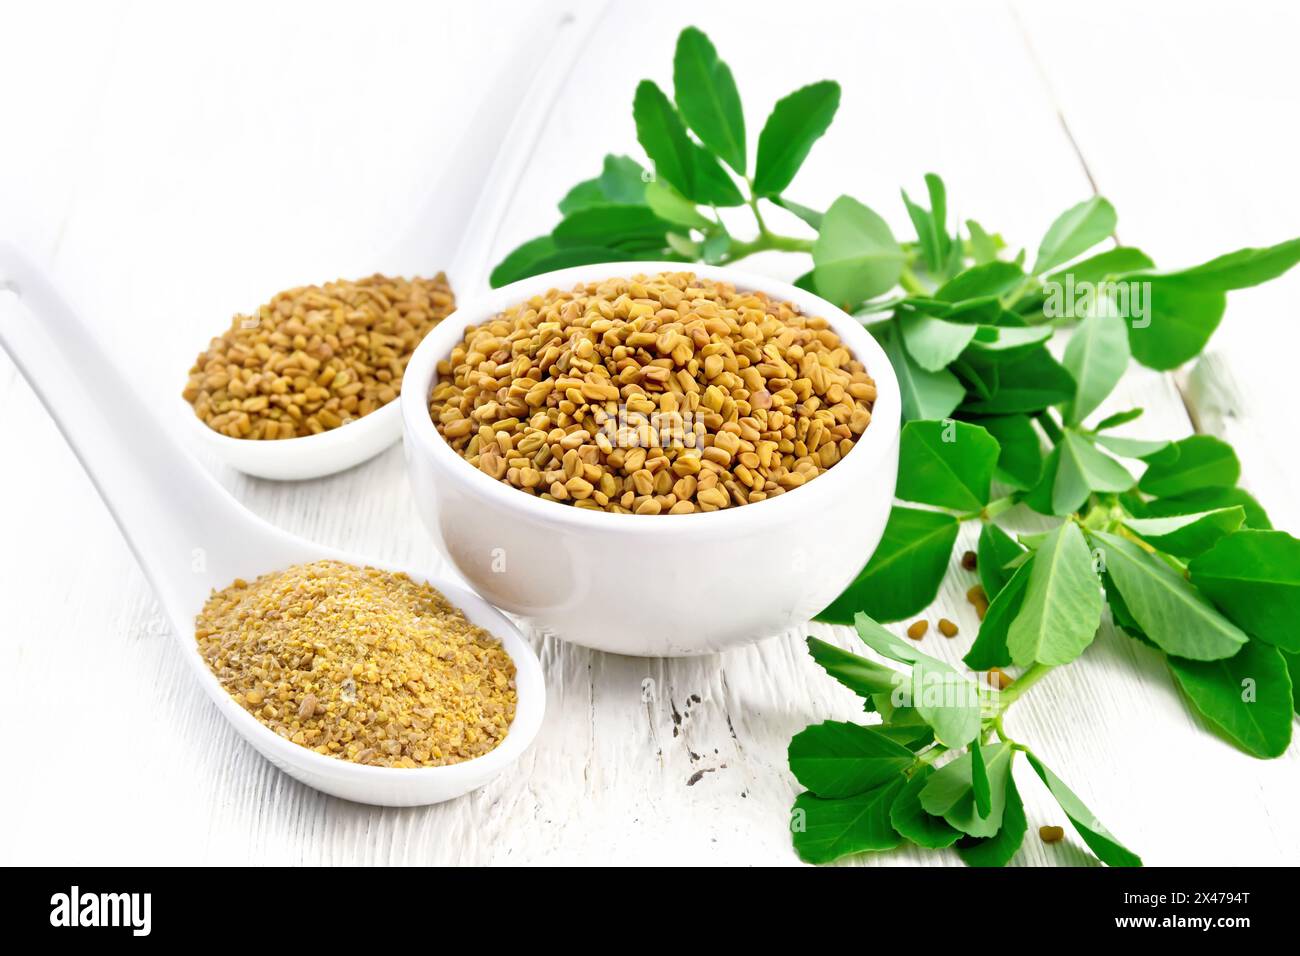 Fenugreek seeds in bowl and spoon, ground spice in spoon with green leaves on wooden board background Stock Photo